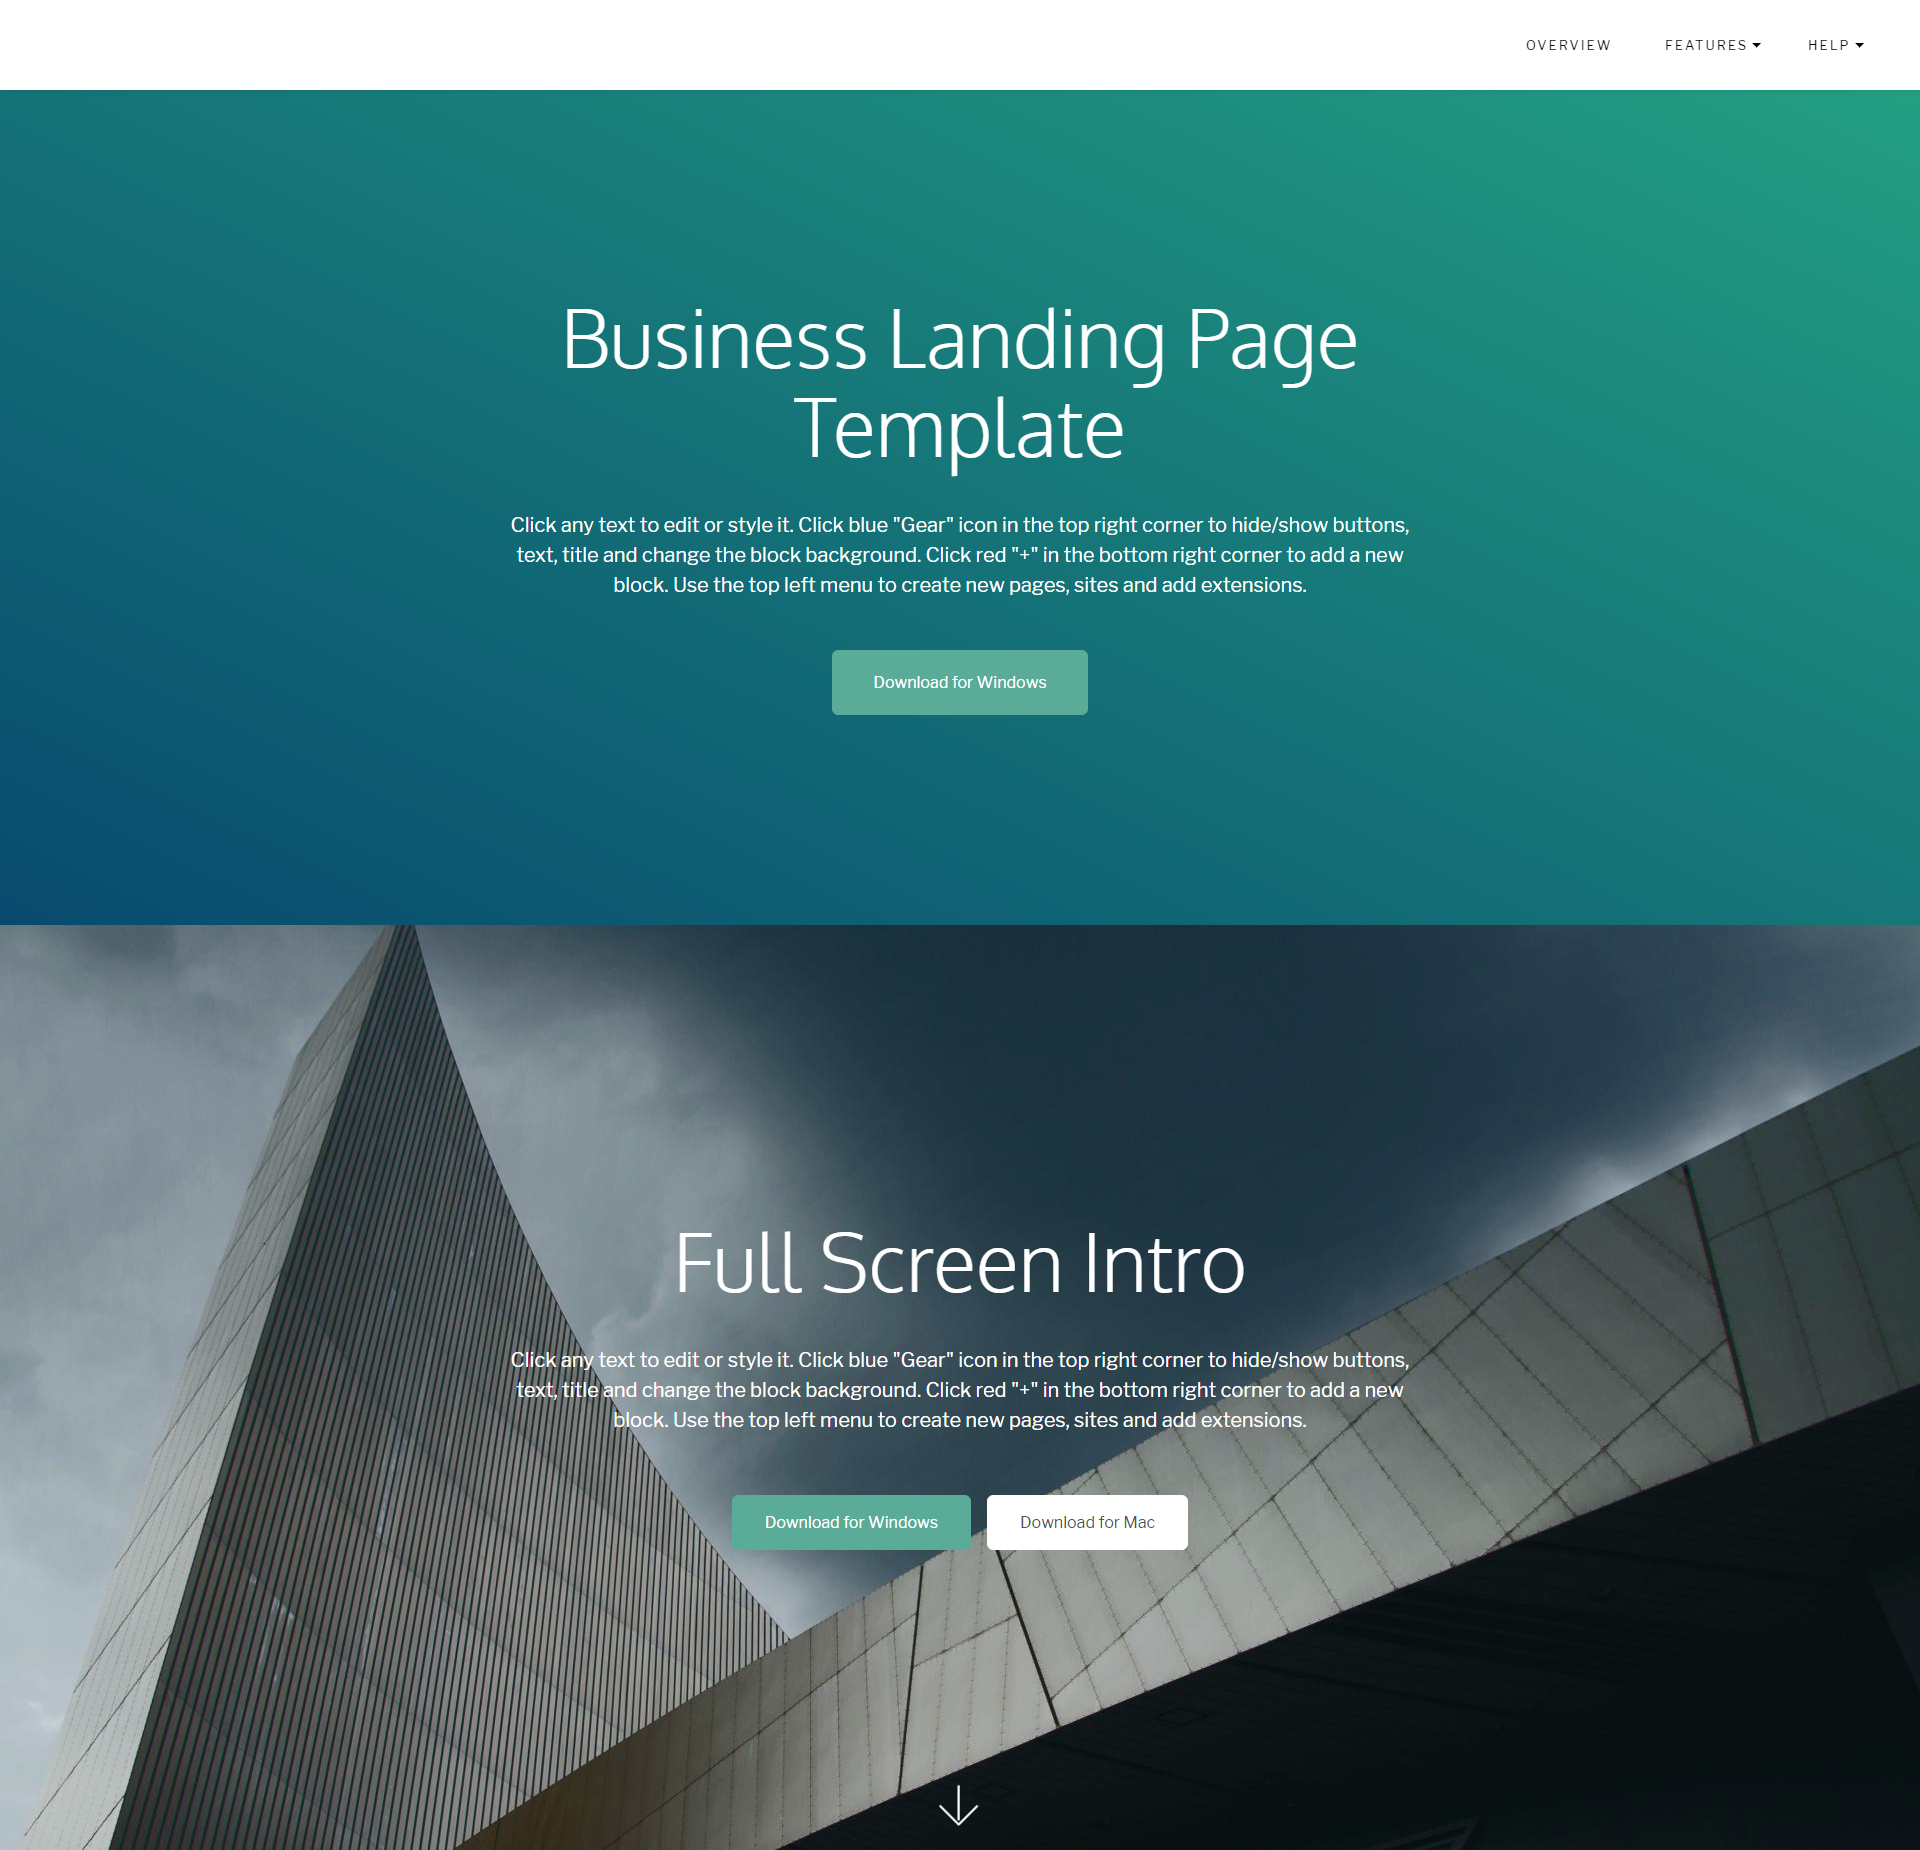 Free Bootstrap DirectM Templates